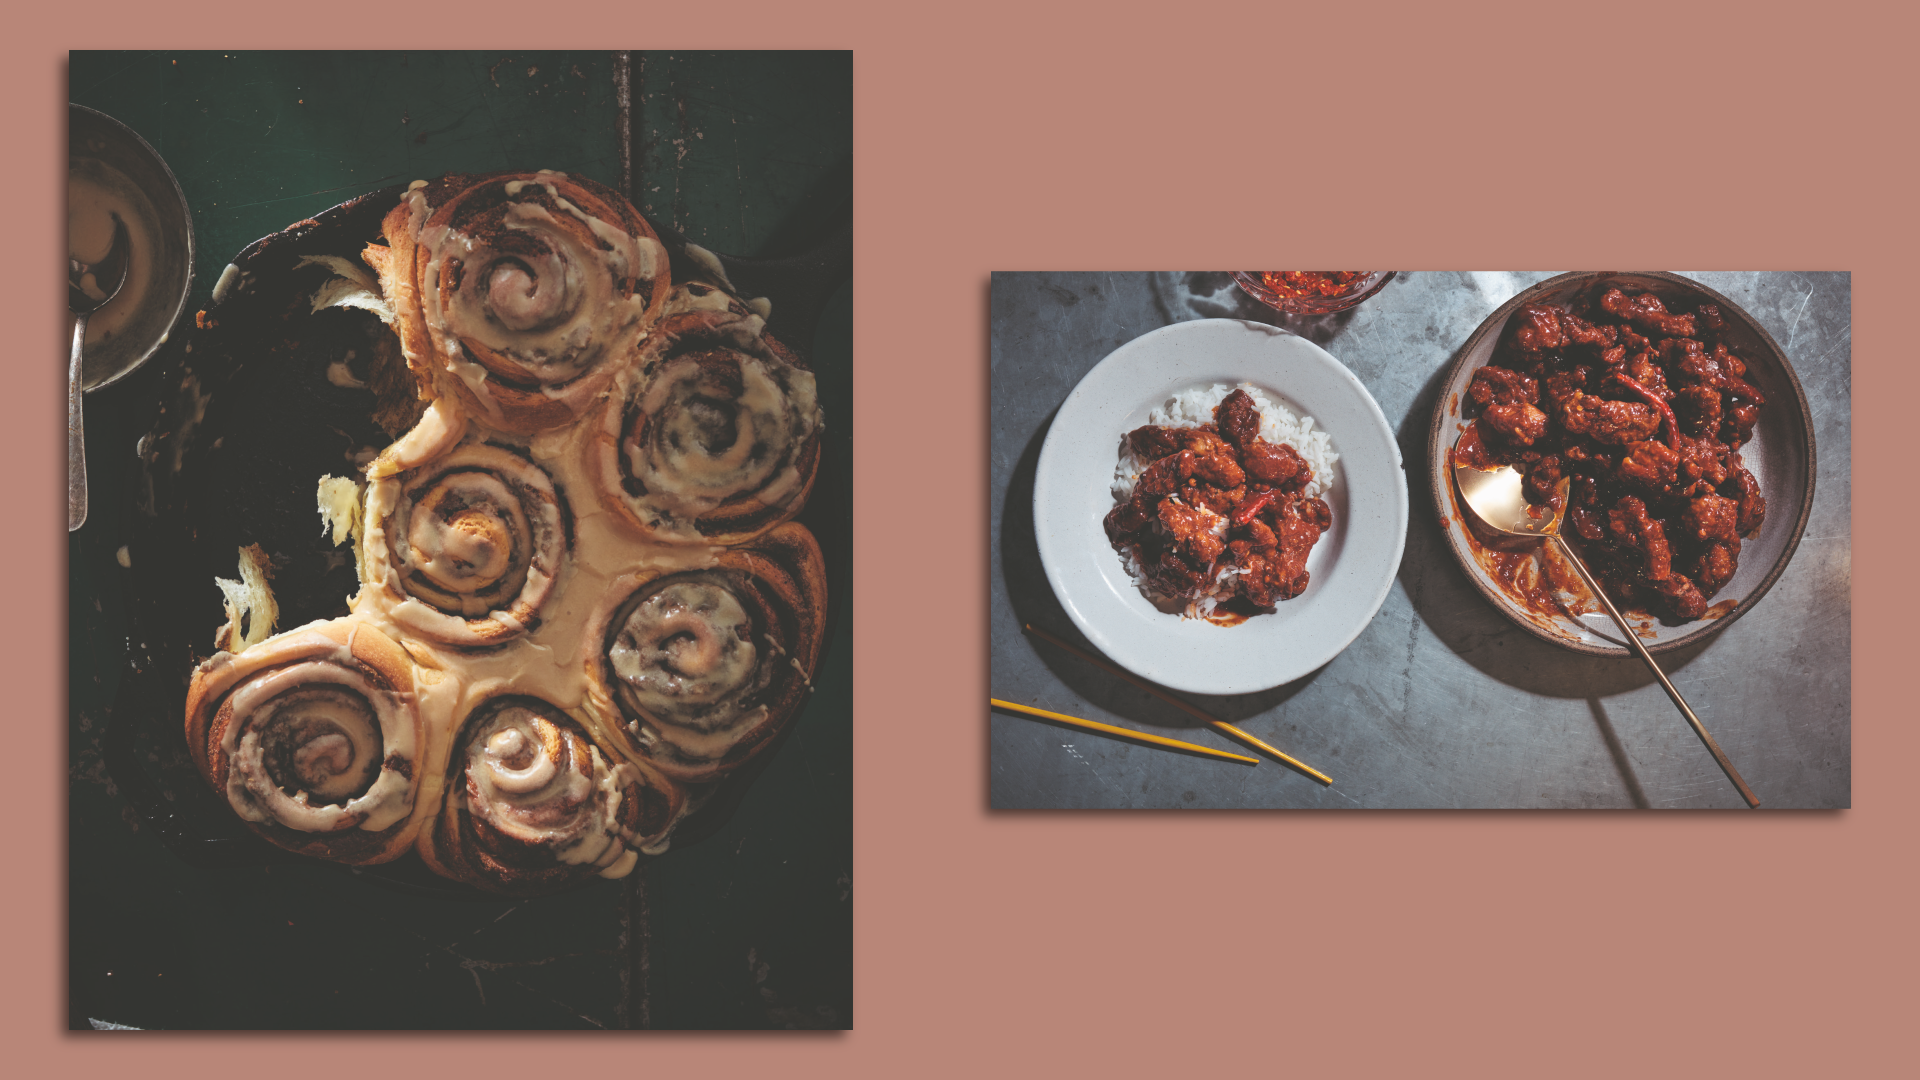 A photo of what looks like cinnamon rolls, with icing on top. A second photo is a dish of delicious-looking chicken glazed with orange sauce.